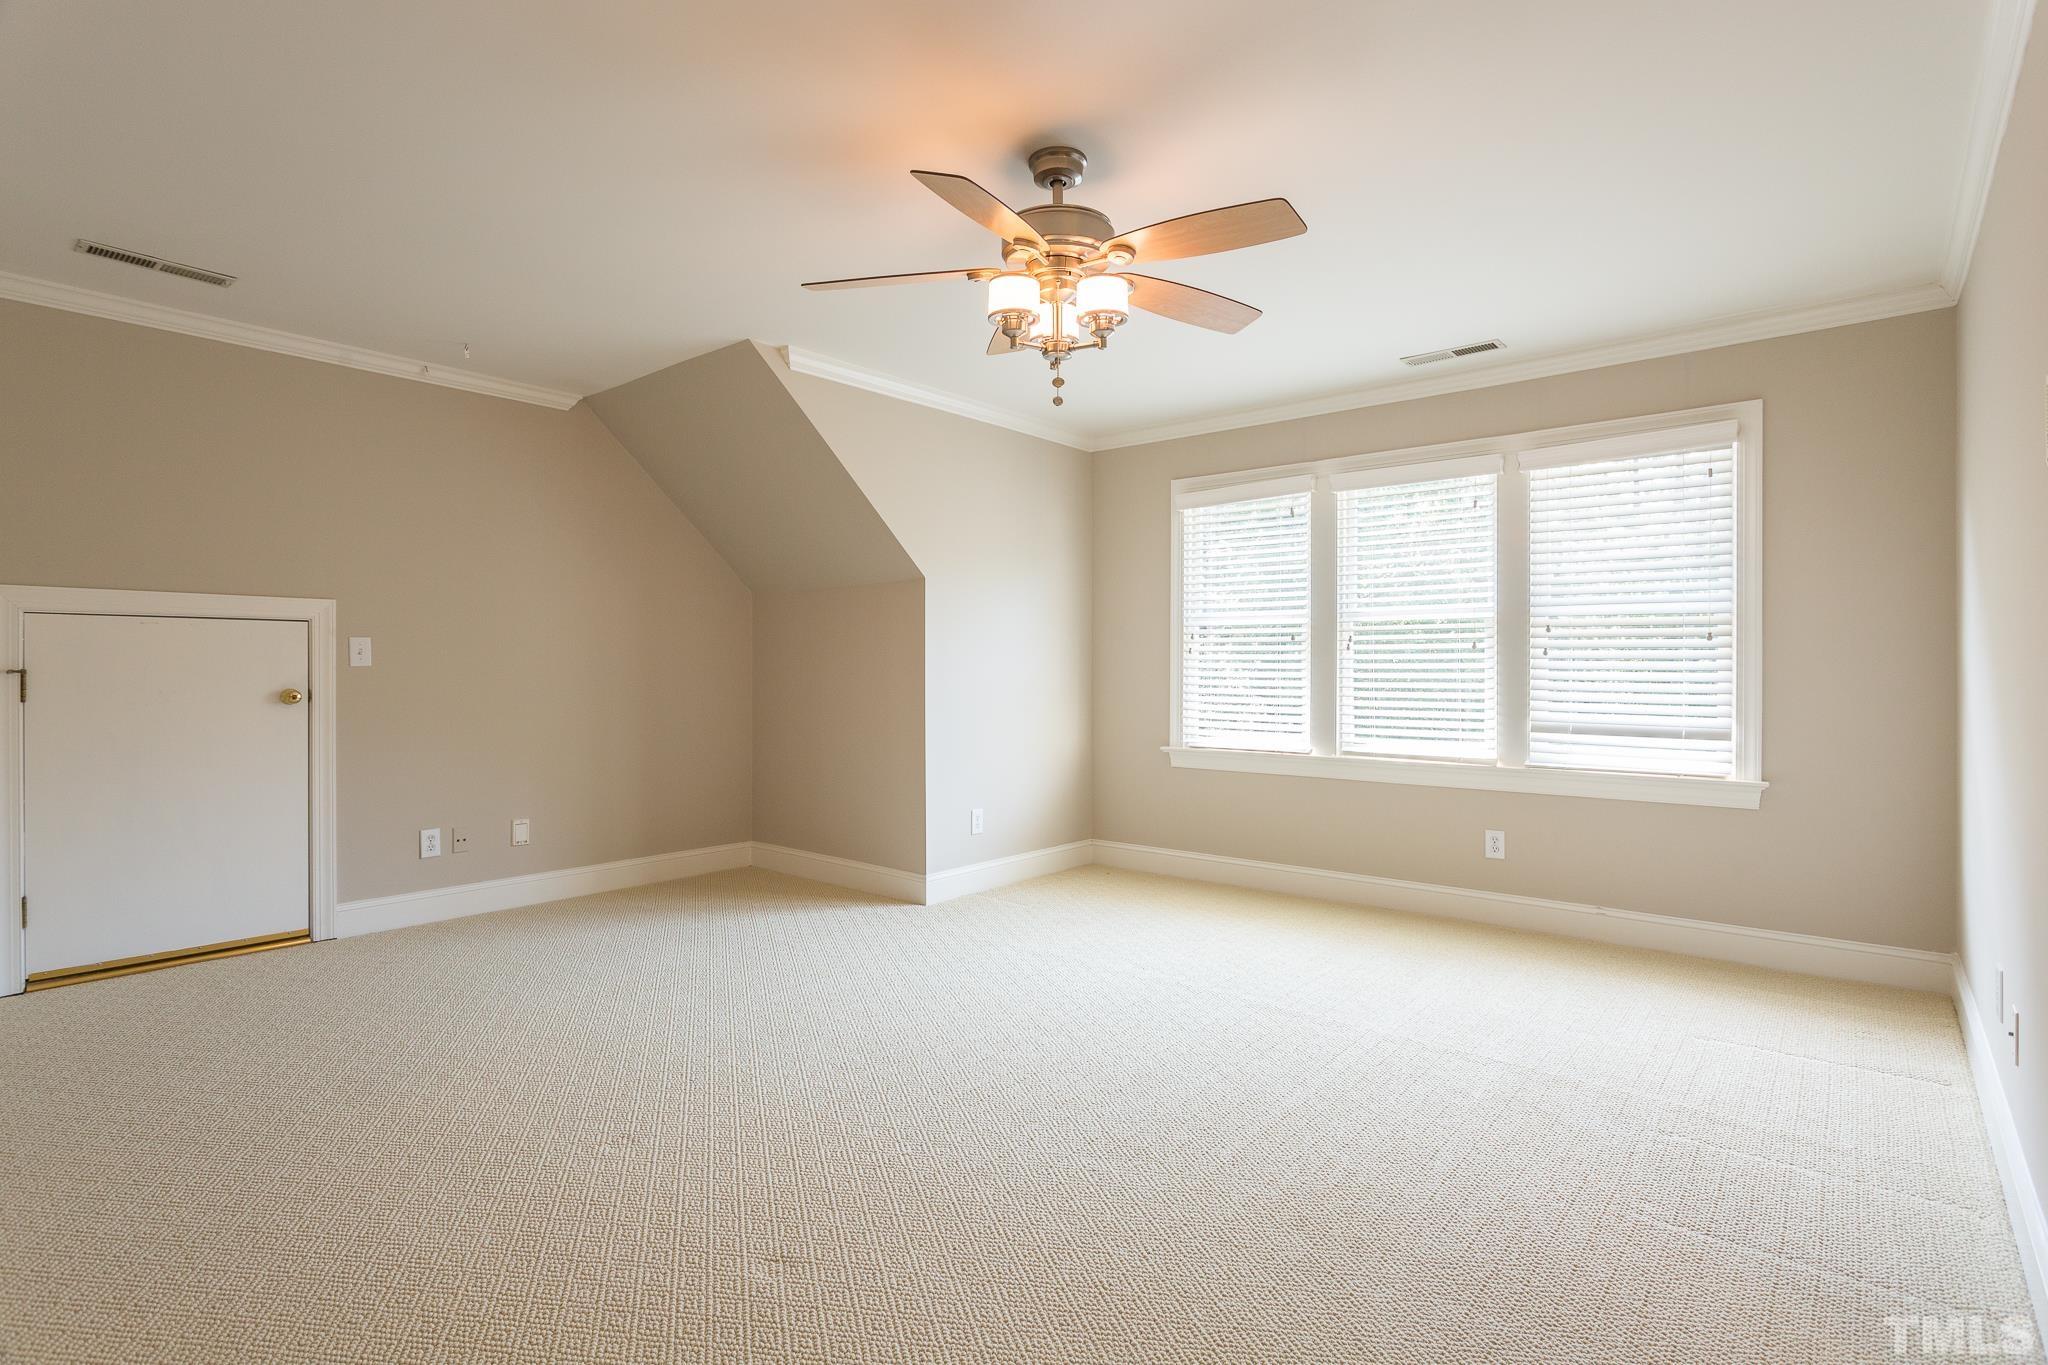 Bedroom 5 is located on the 3rd floor and features a lovely private bath, huge walk in closet and a new designated HVAC system installed in 2020.